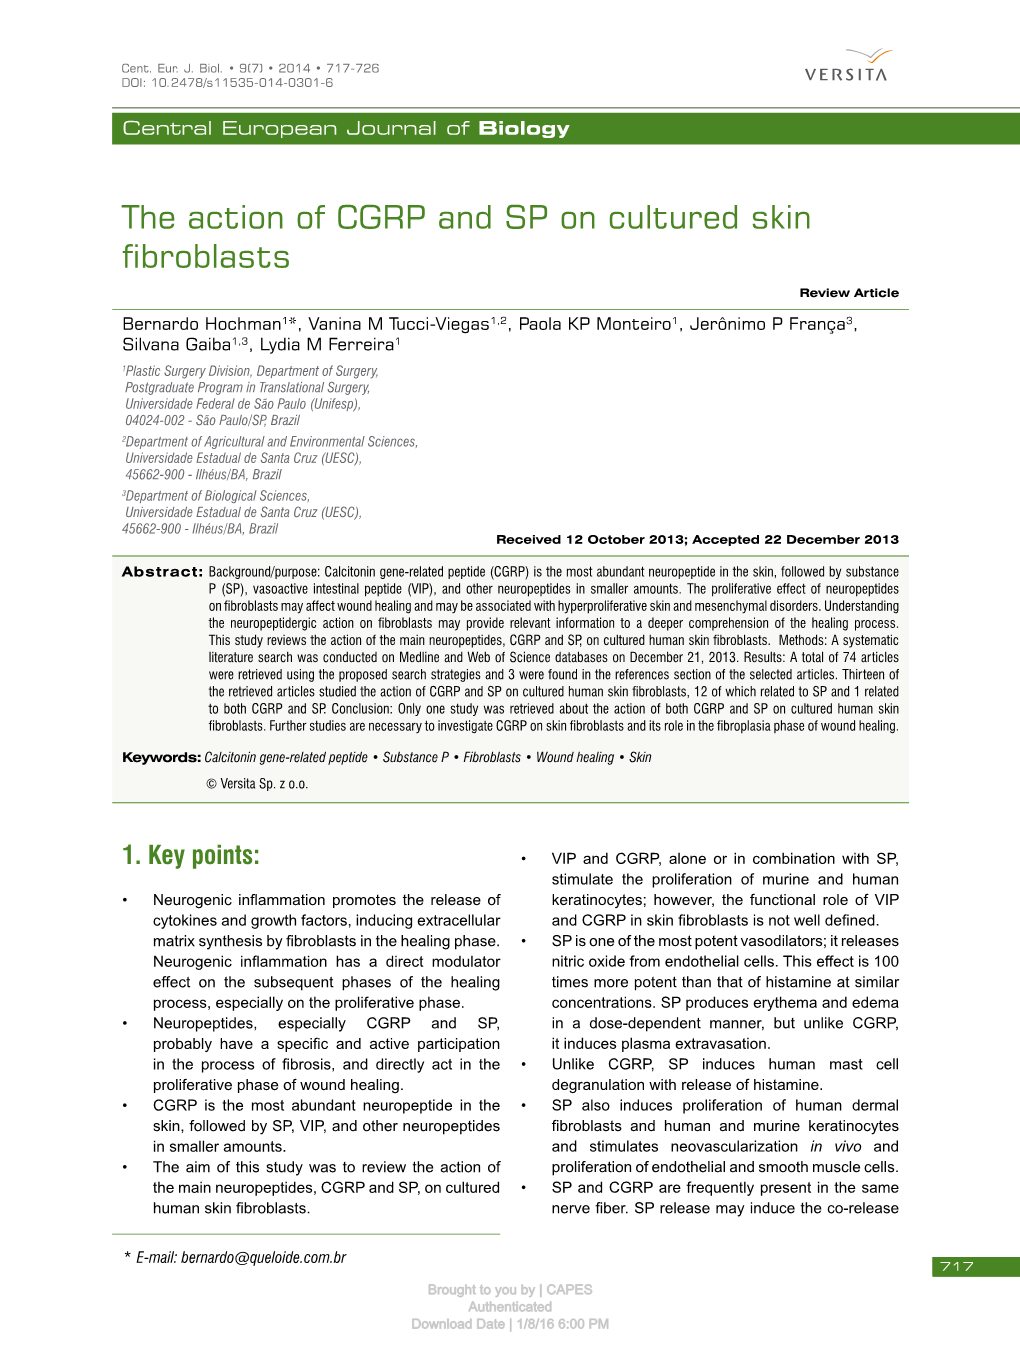 The Action of CGRP and SP on Cultured Skin Fibroblasts